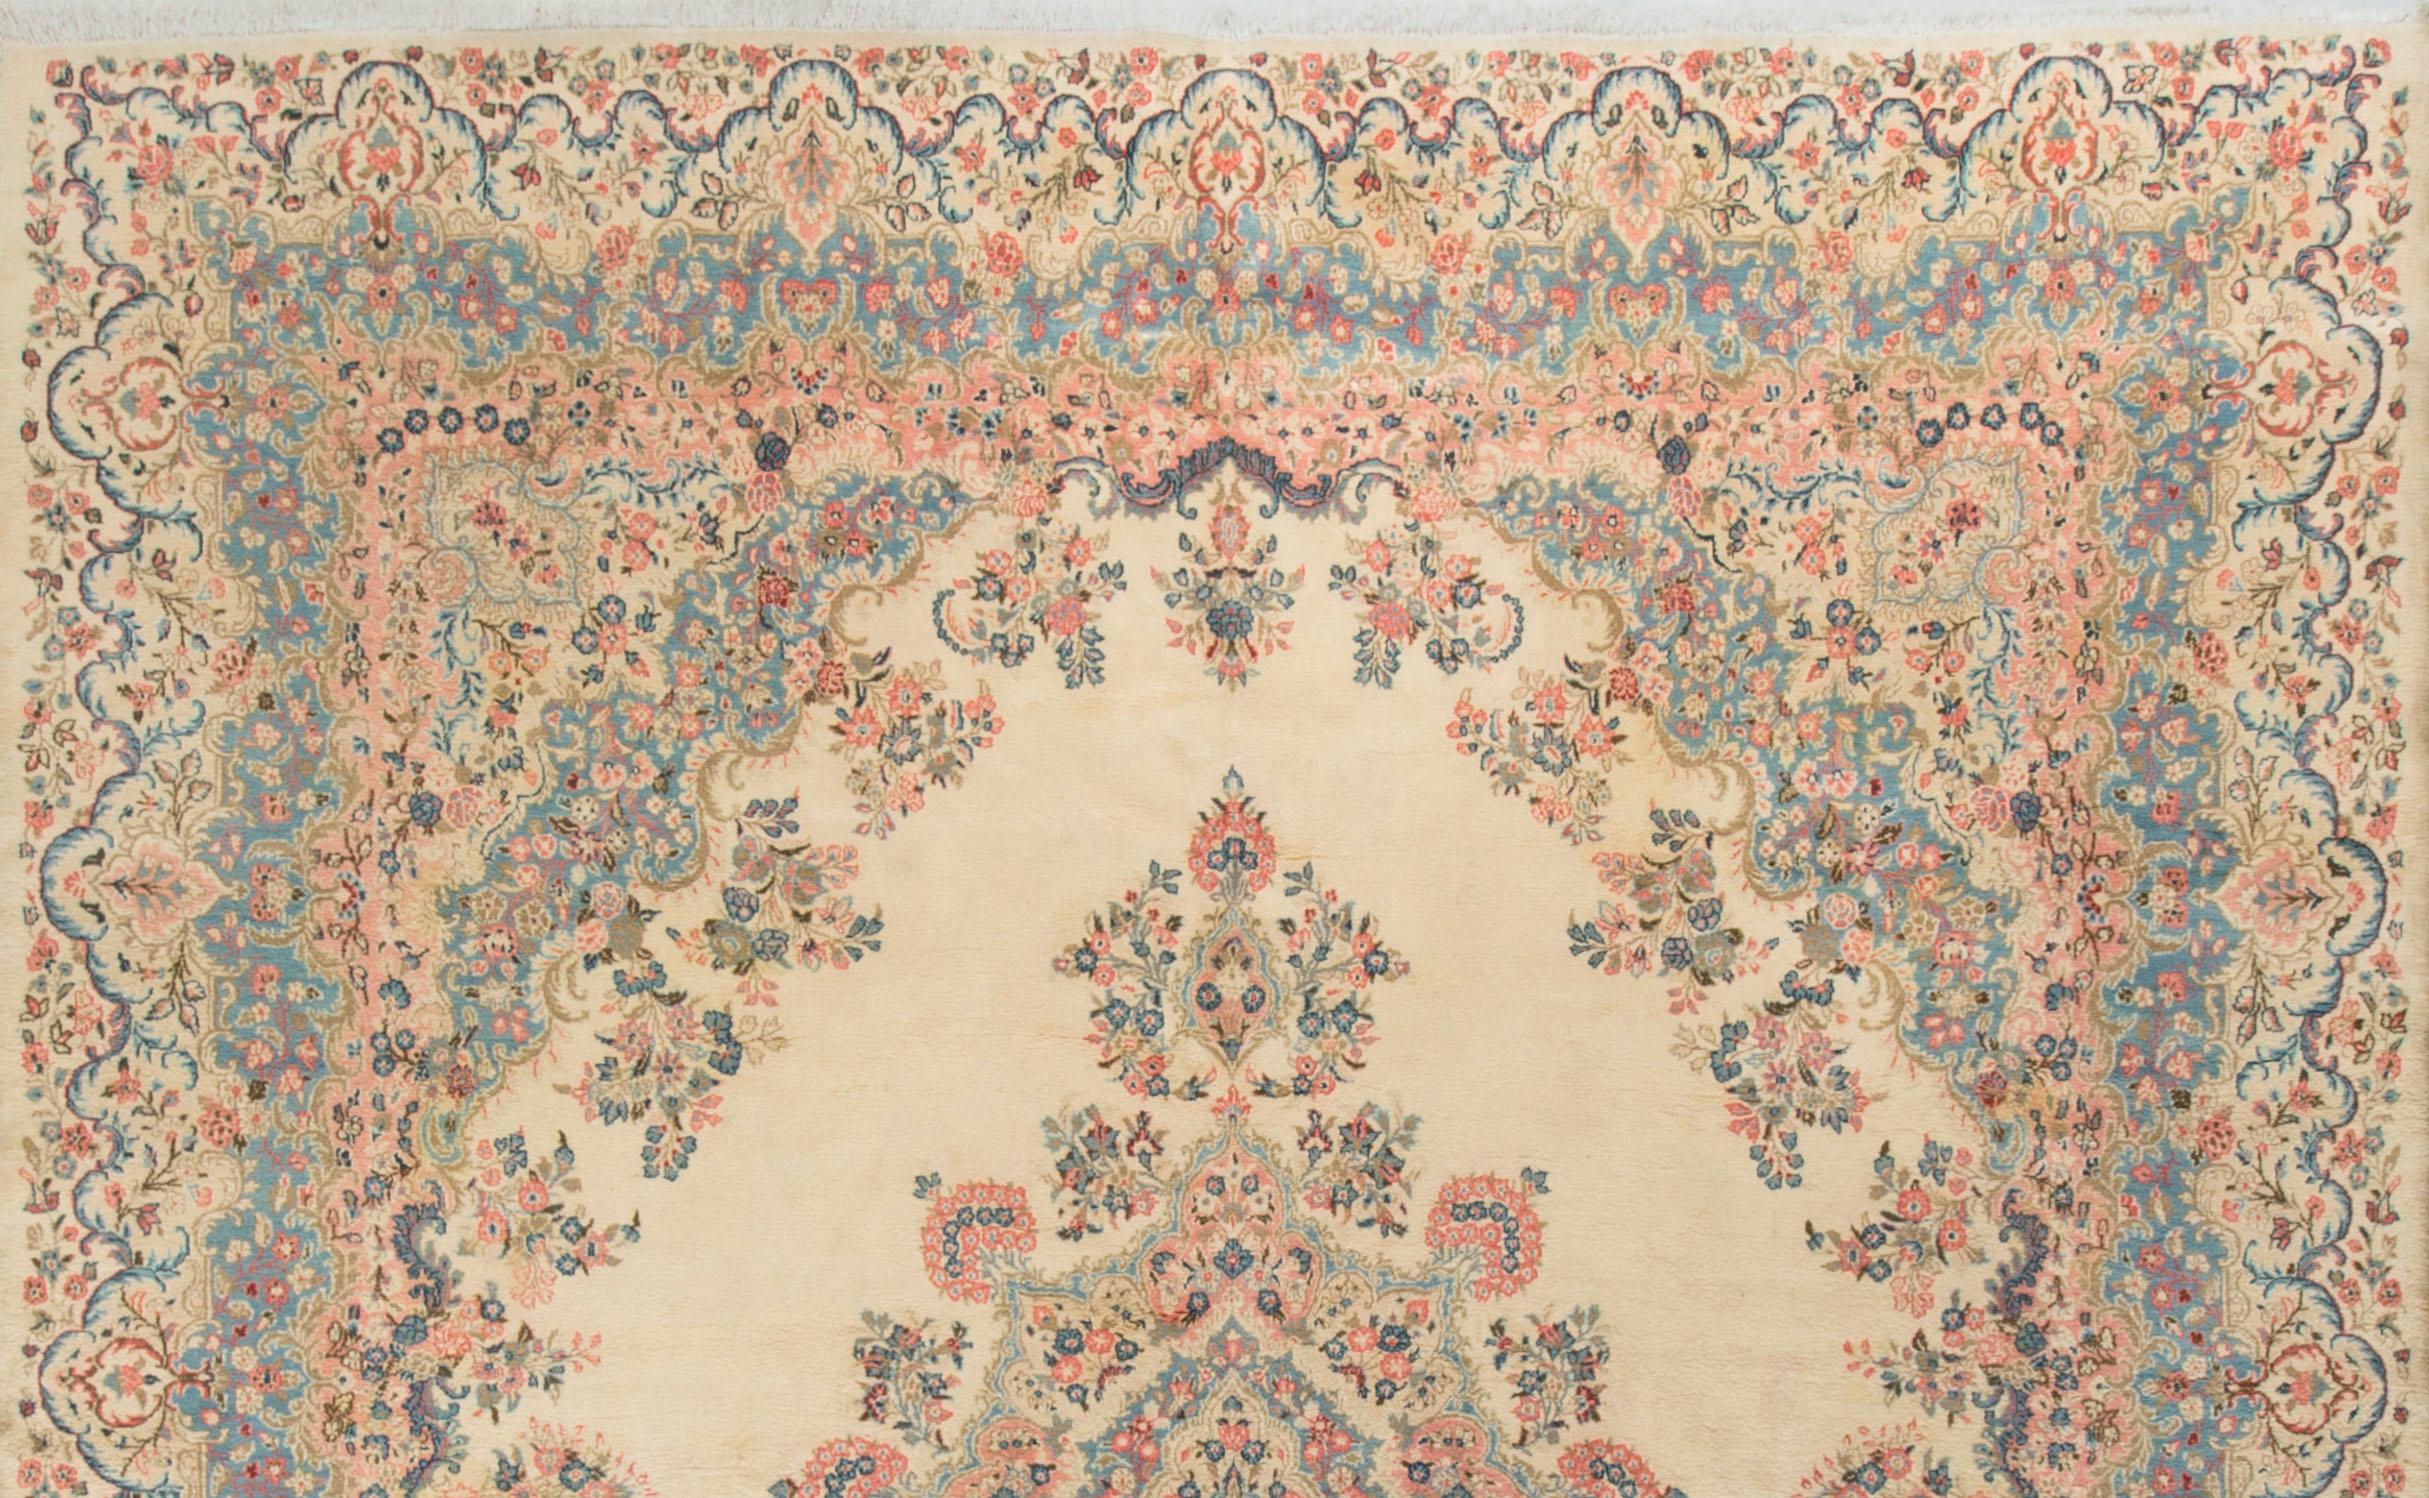 Kazvin or Gazvin is situated about 100 miles west of Tehran and produced carpets up to circa 1950. The colors Ivory and Light Blue suggest a light and delicate color palette, which is often associated with Persian rugs. Persian rugs usually have a